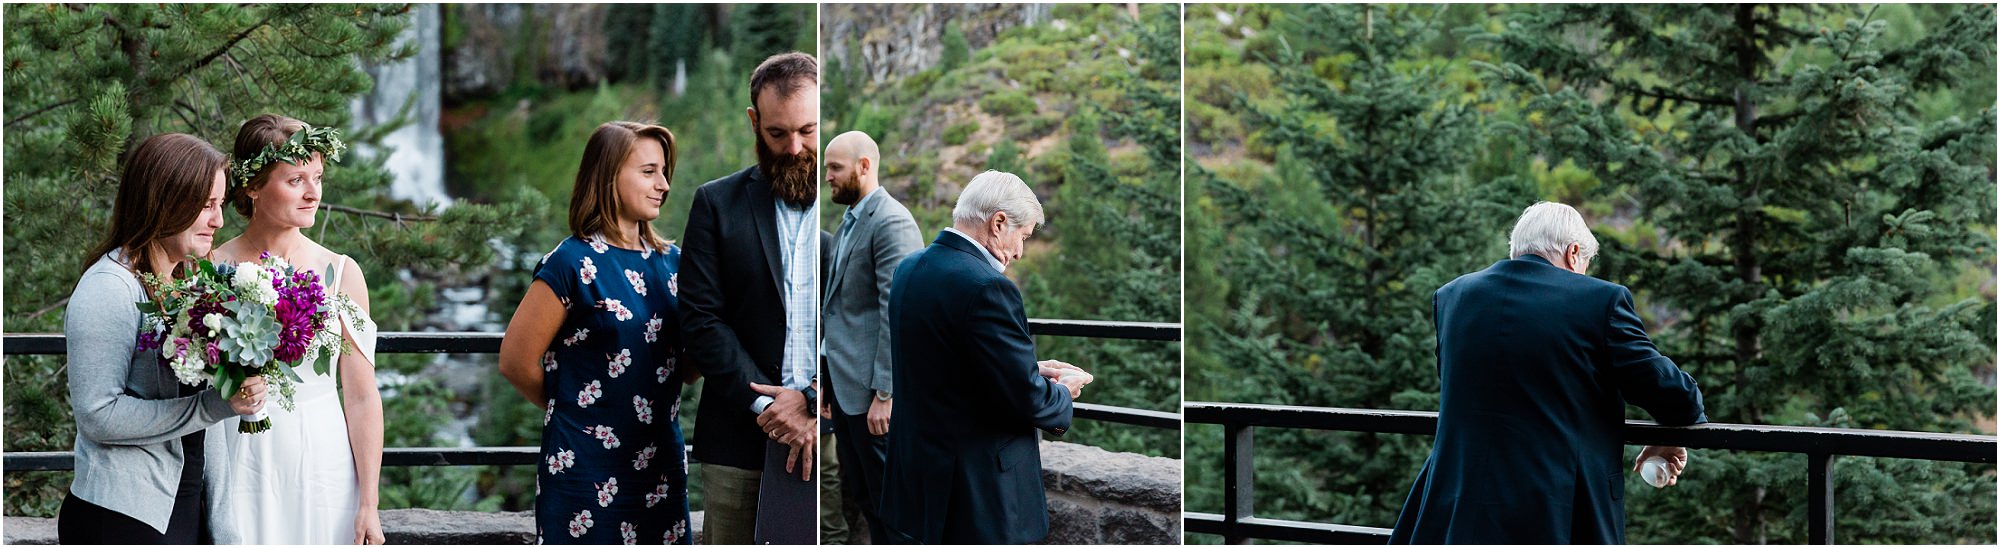 The bride's father spreads his wife's ashes during an intimate elopement micro wedding ceremony as the bride and her sister look on with tears in their eyes. | Bend Oregon elopement photographer Erica Swantek Photography.